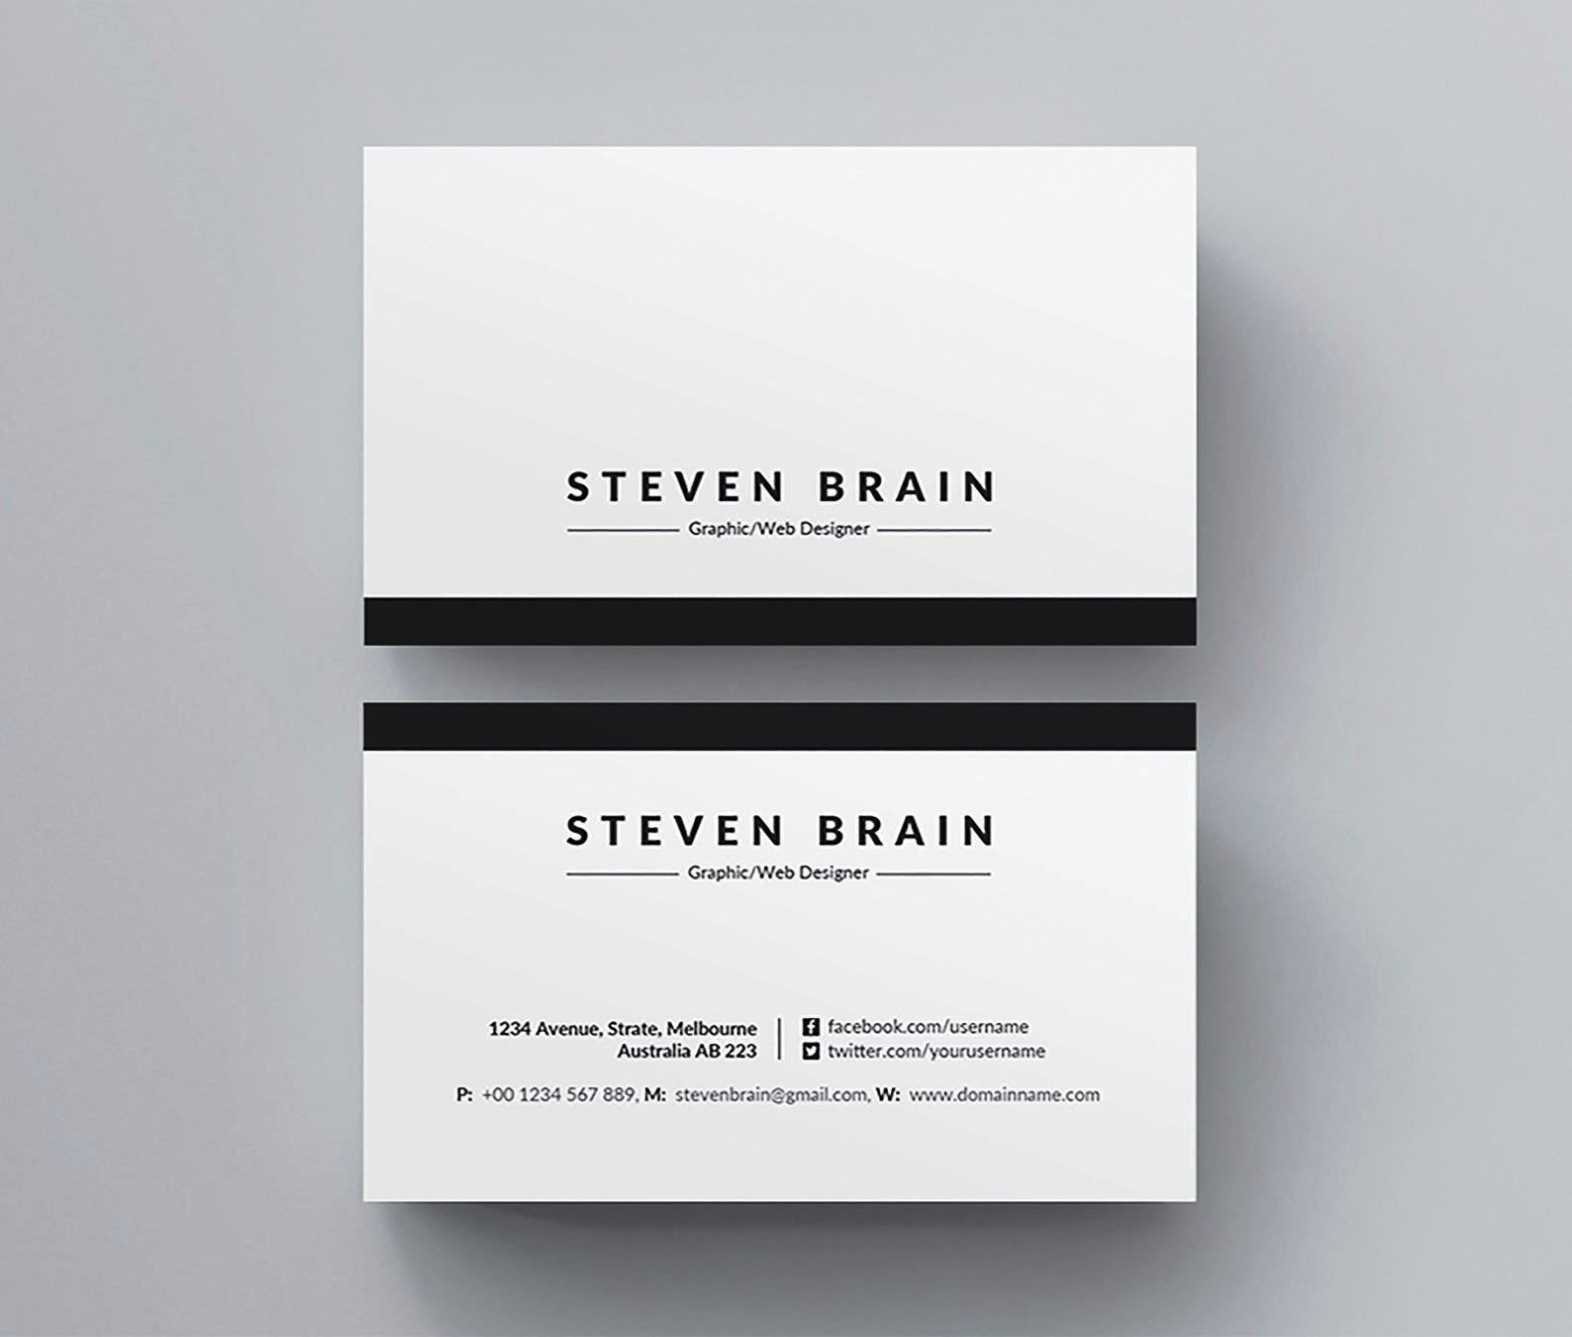 Word Business Card Template Free ~ Addictionary within Word 2013 Business Card Template